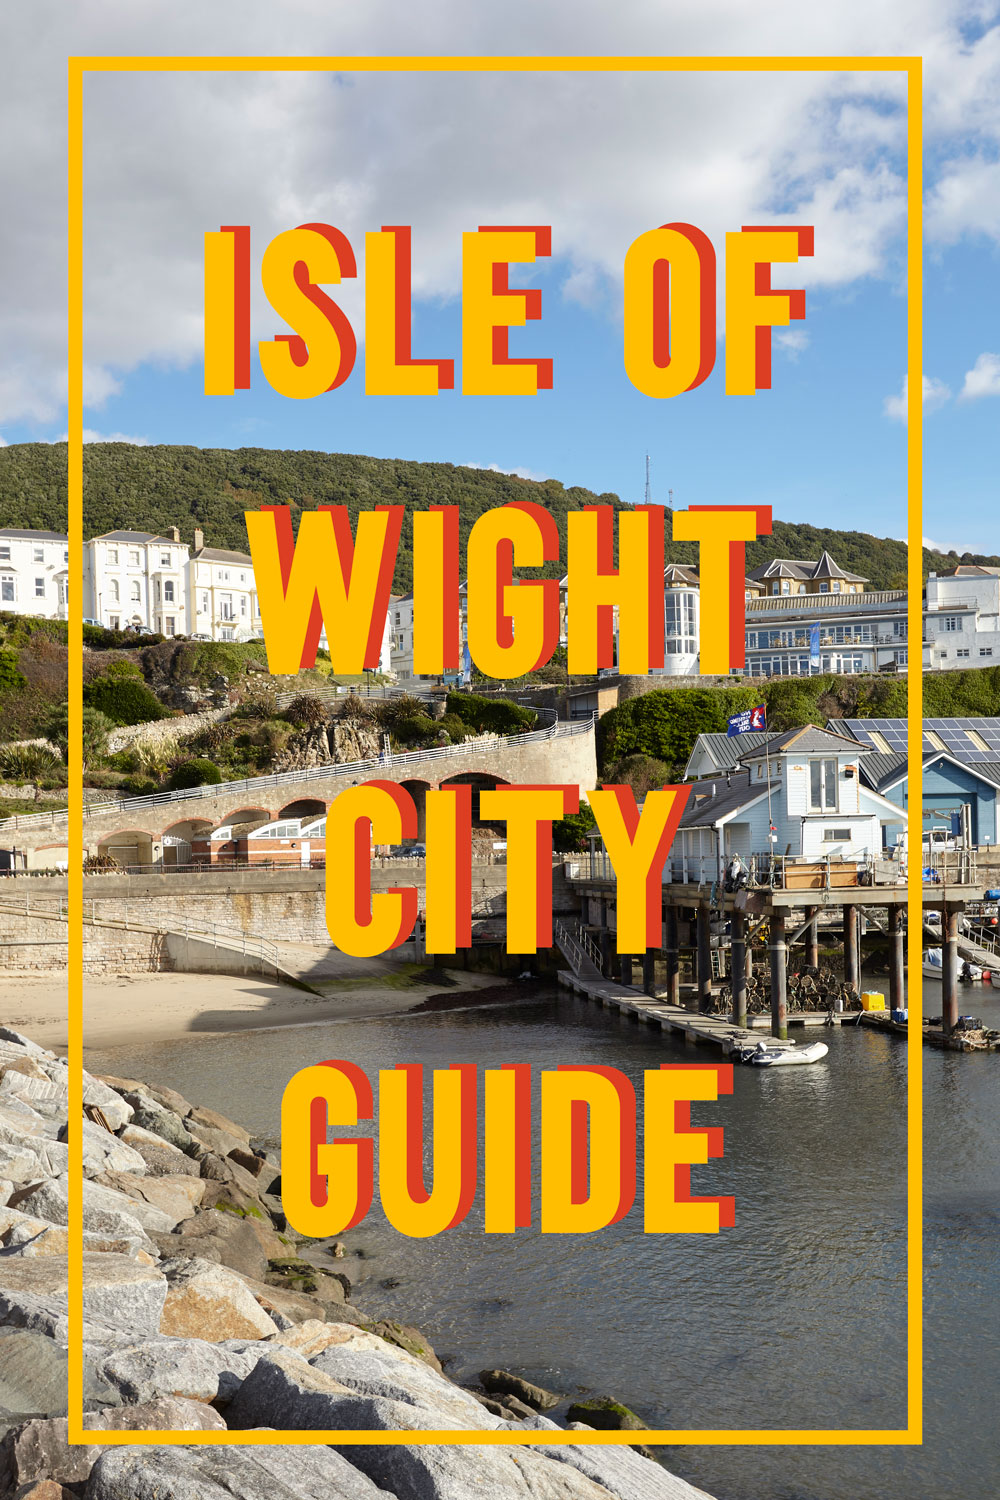 FRUGAL GUIDE TO…THE ISLE OF WIGHT